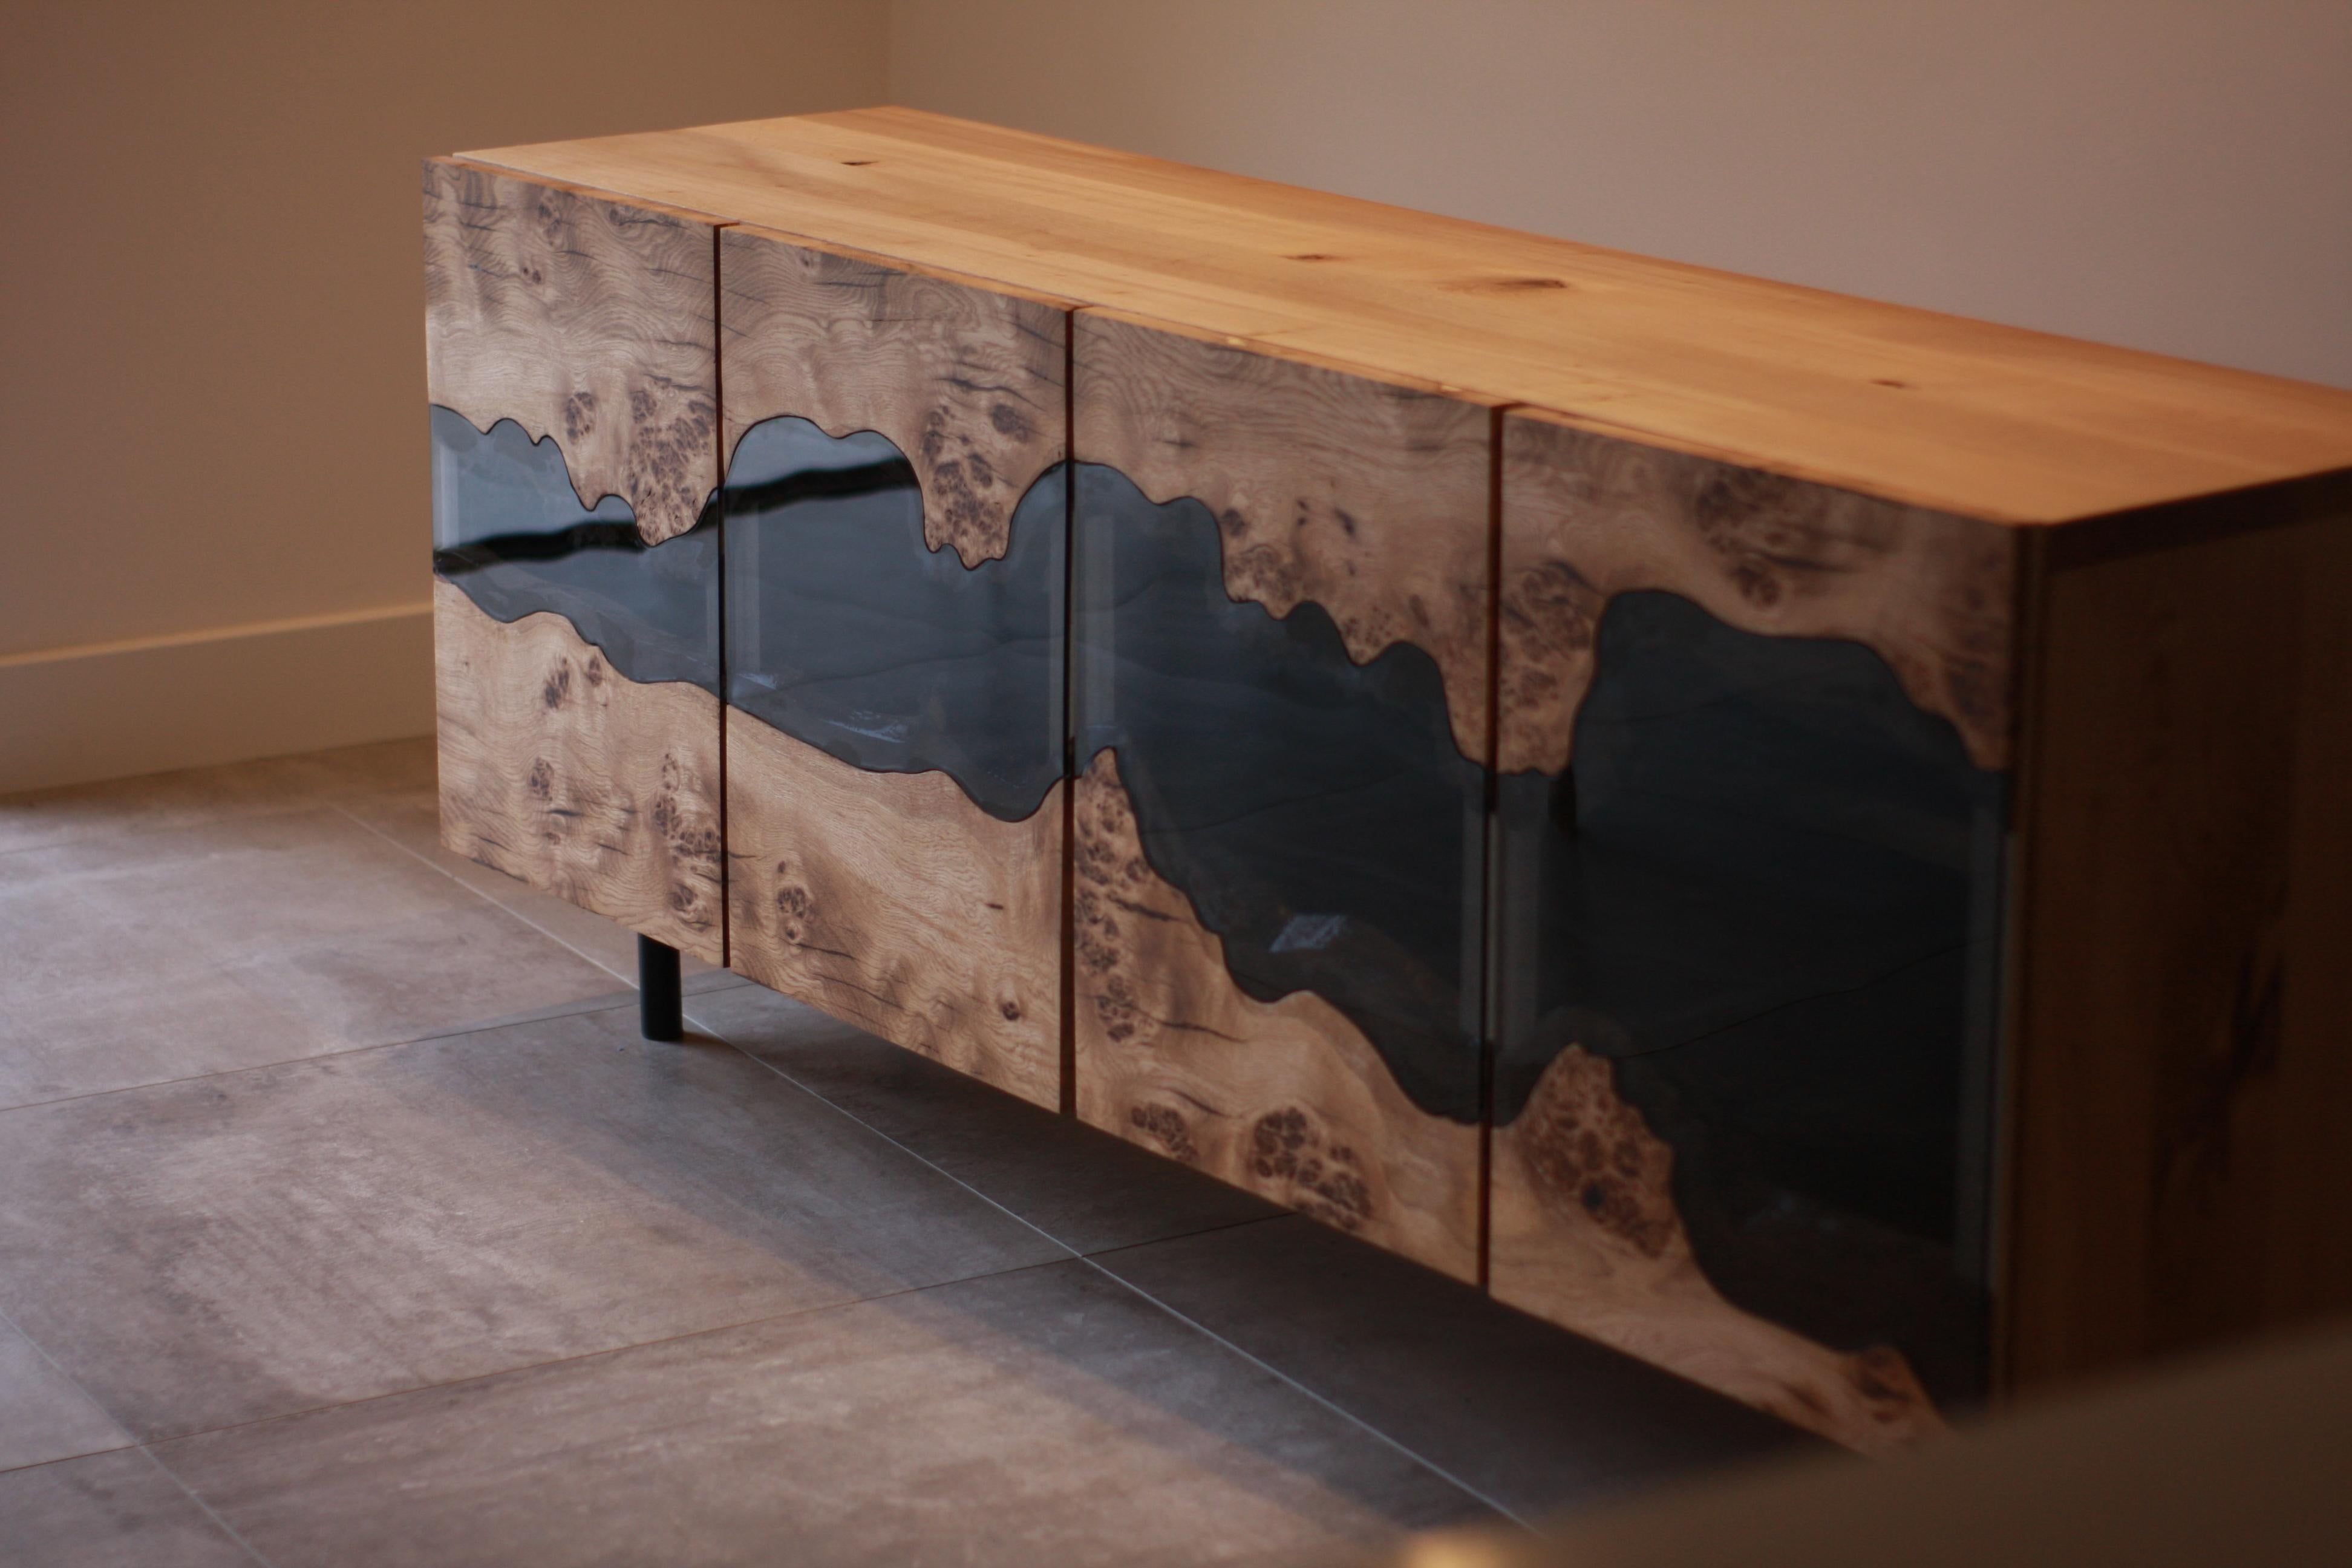 Here you will find a very special piece. A piece you will not find anywhere else.

This is the smoked glass inlay and oak credenza.
The oak doors are made from waney edge slabs of very sought after pippy burr oak - this is because for maximum effect